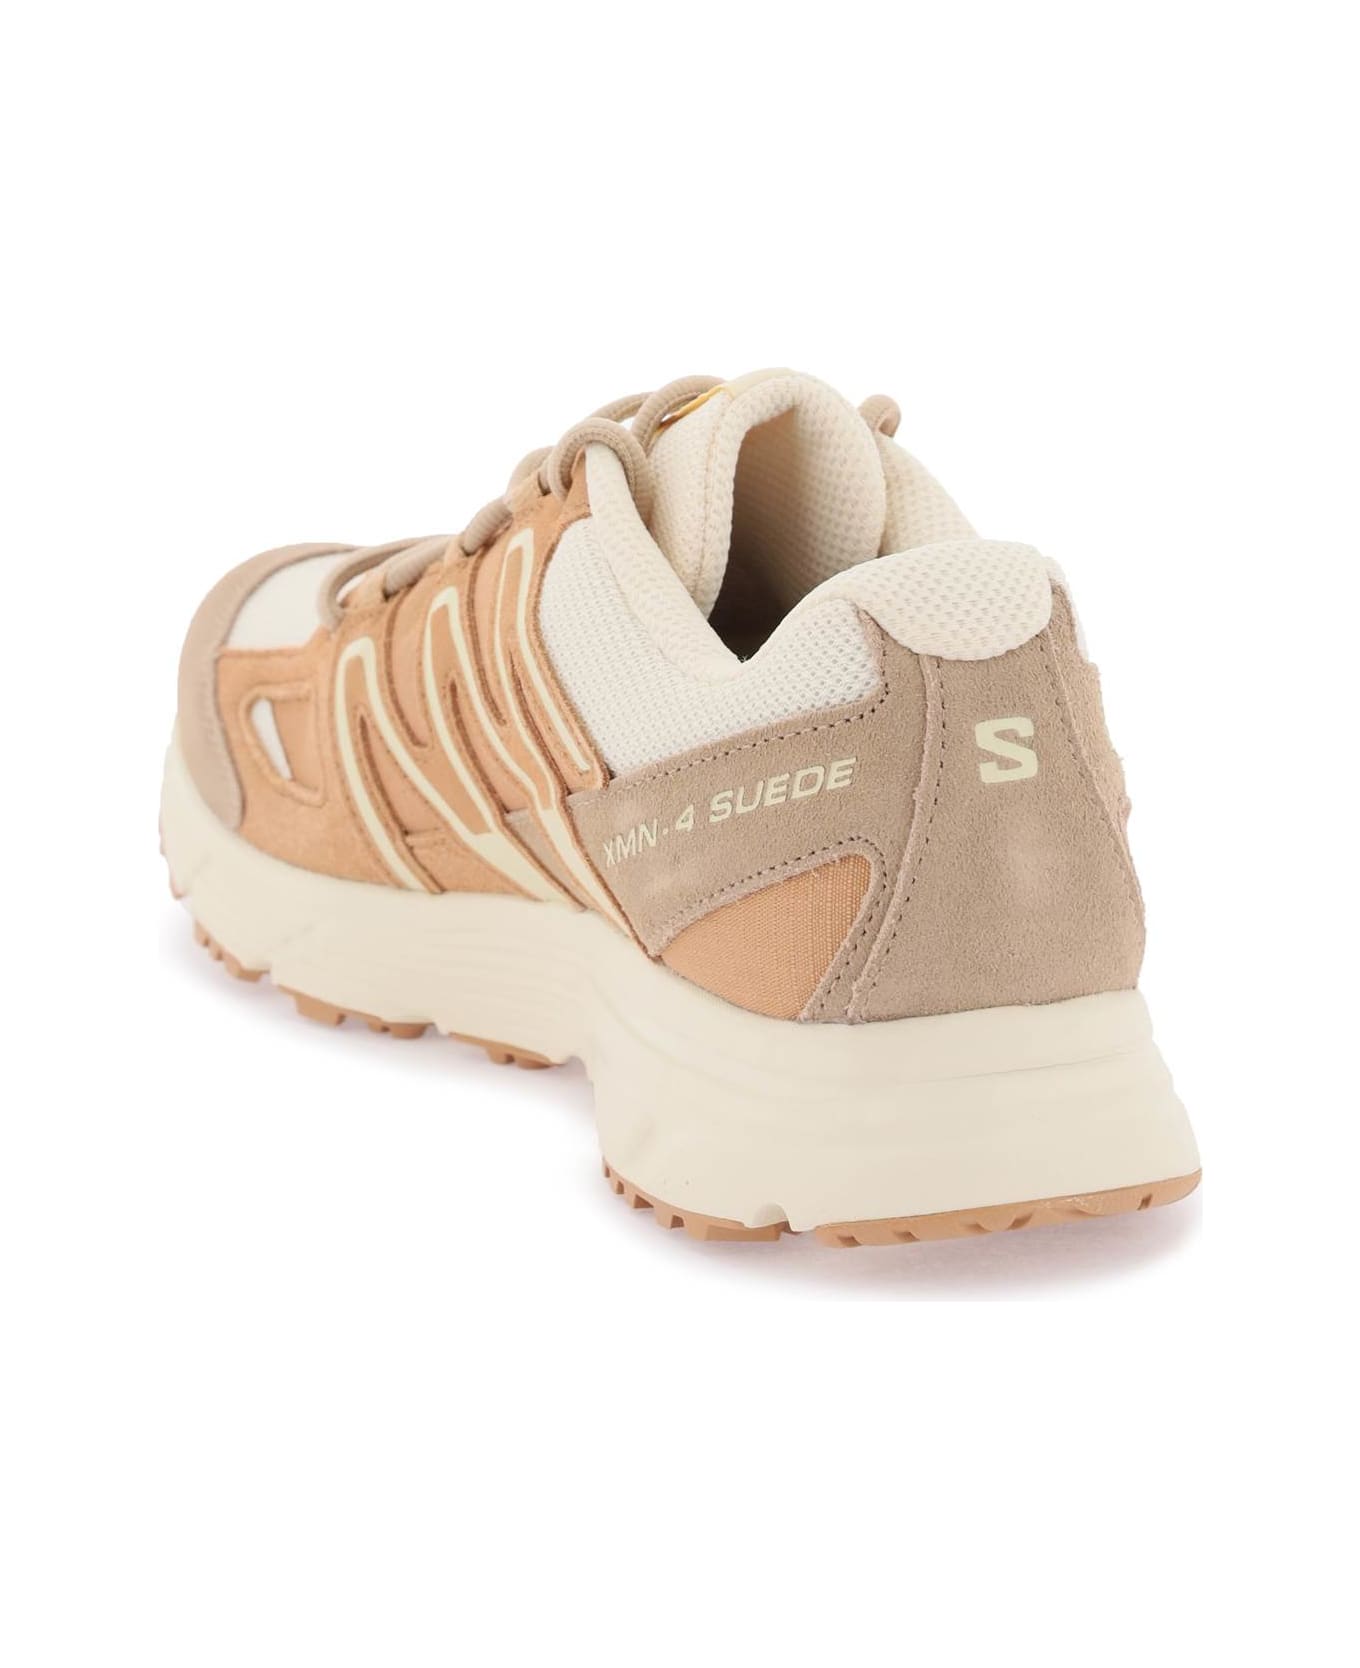 Salomon X-mission 4 Suede Sneakers - NATURAL SANDSTORM BLEACHED SAND (White)